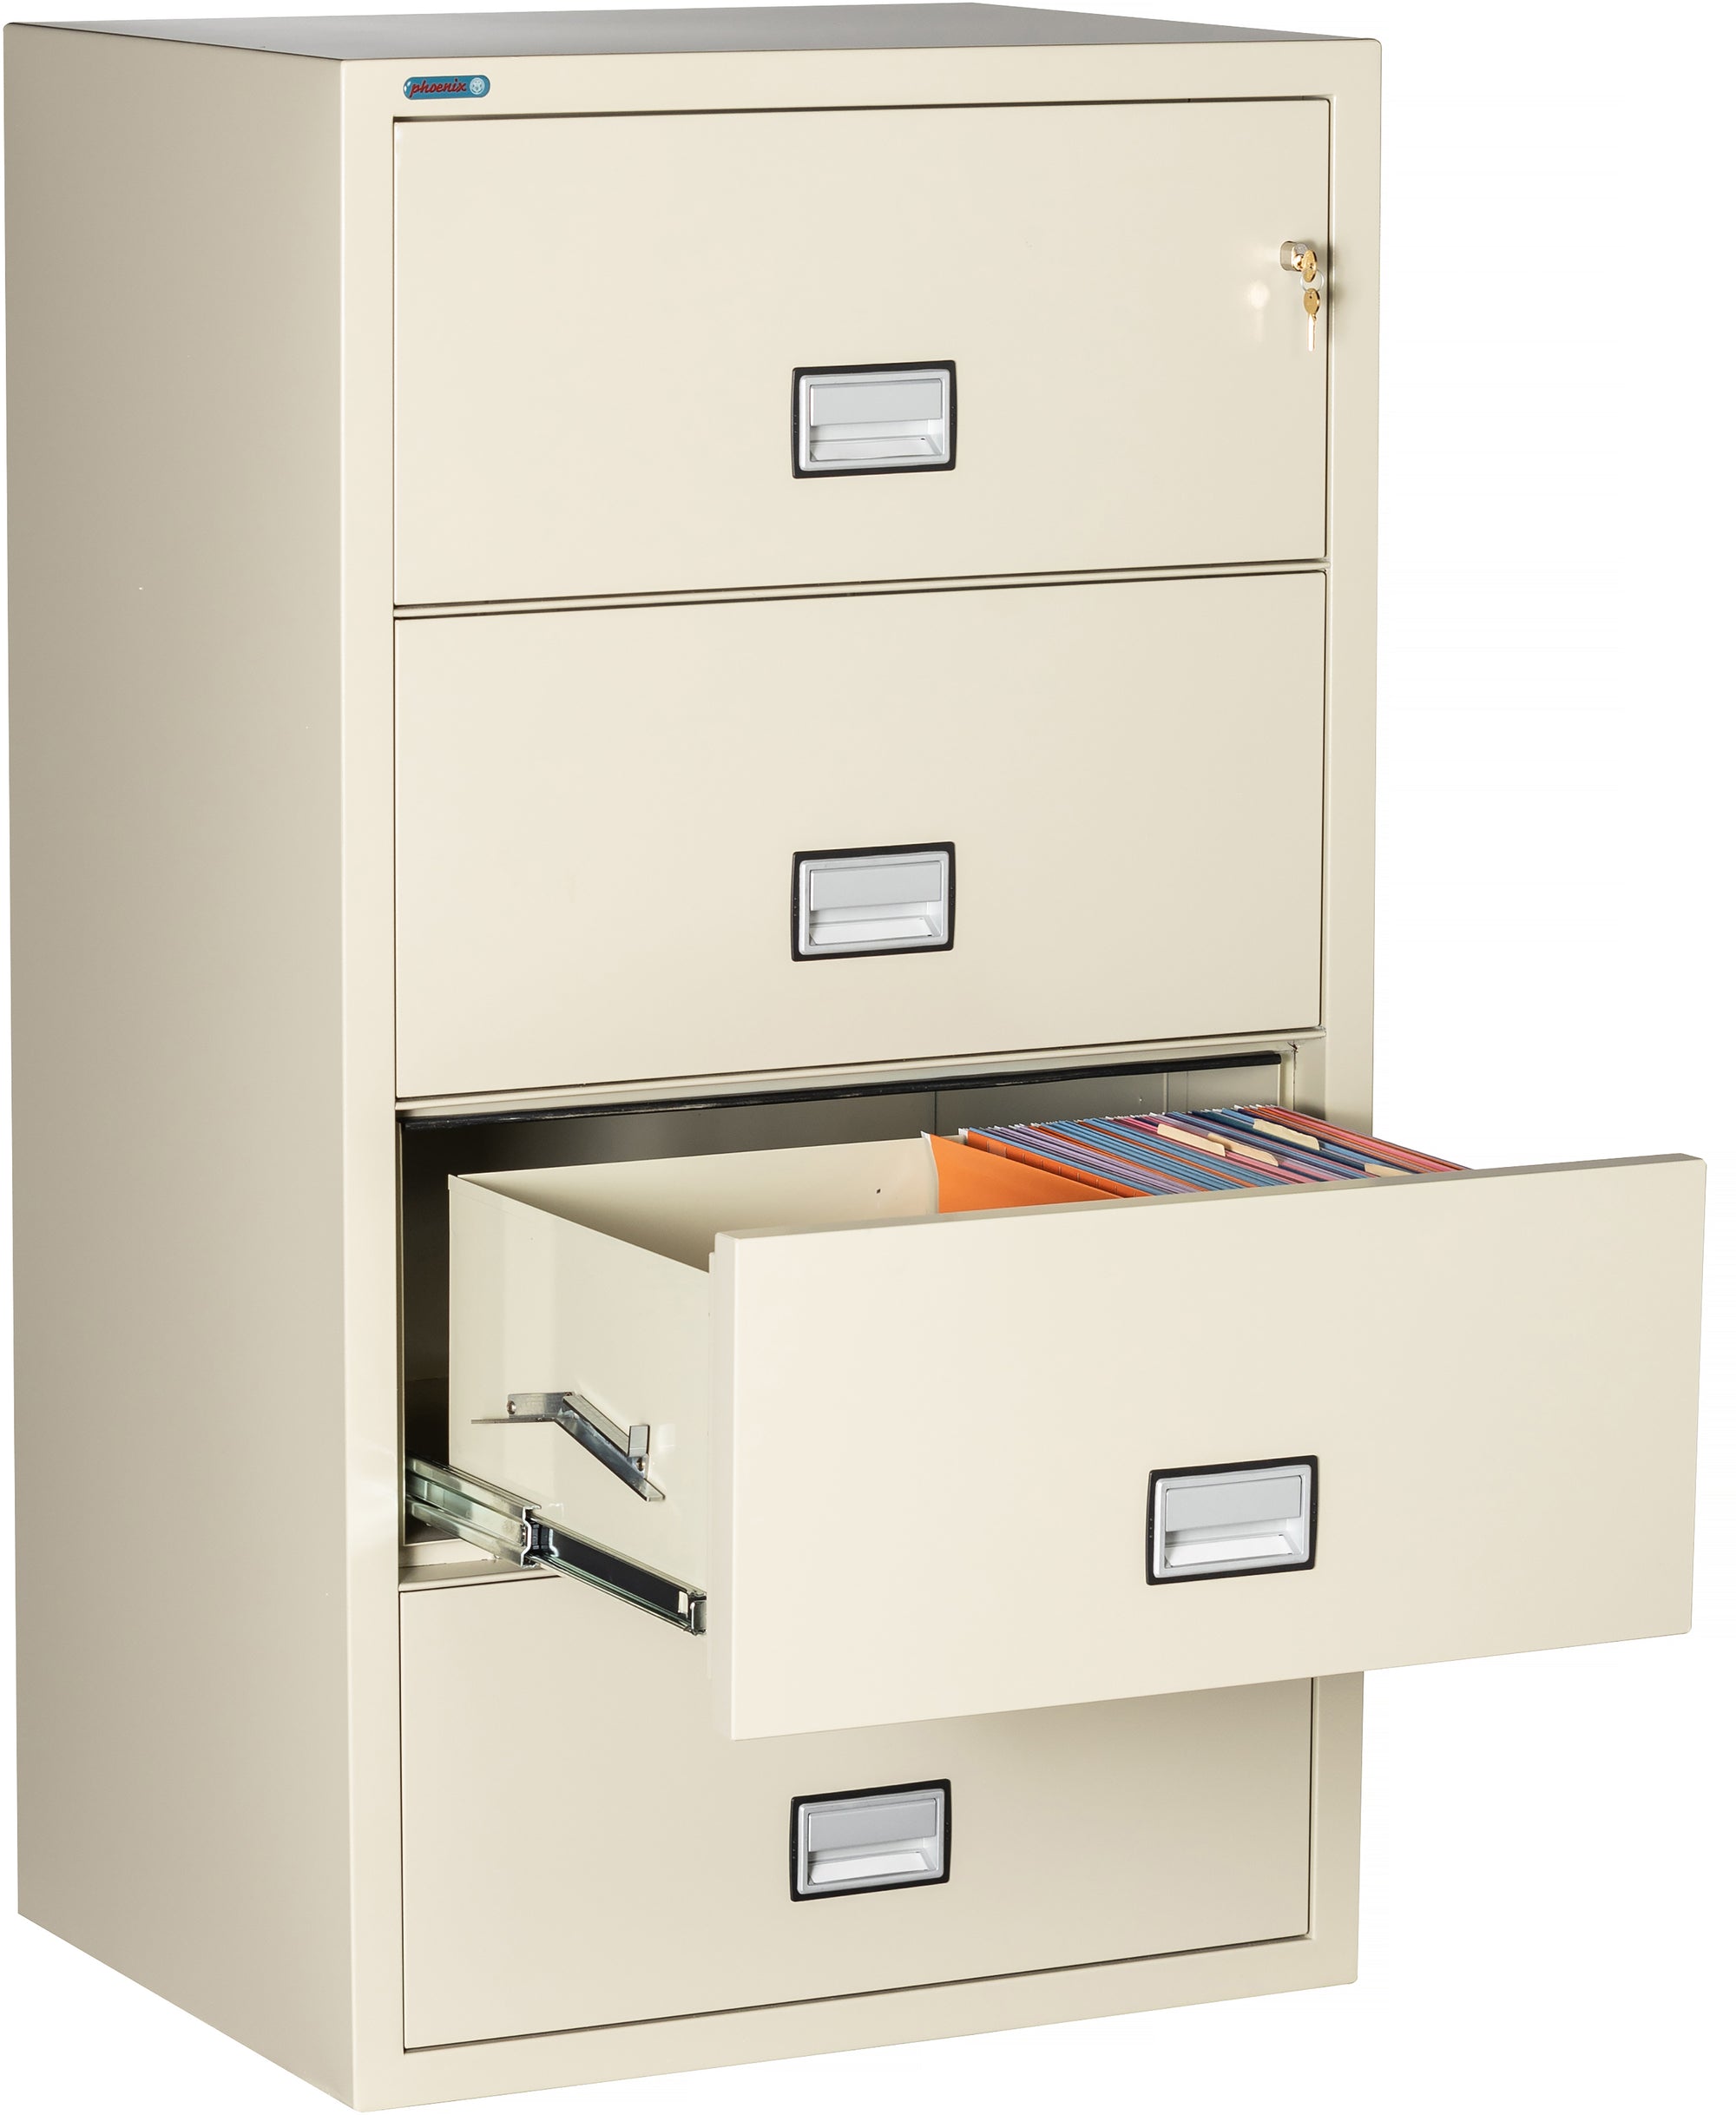 Phoenix Safe LAT4W31 31" 4 Drawer Lateral Size Fire File Cabinet Putty